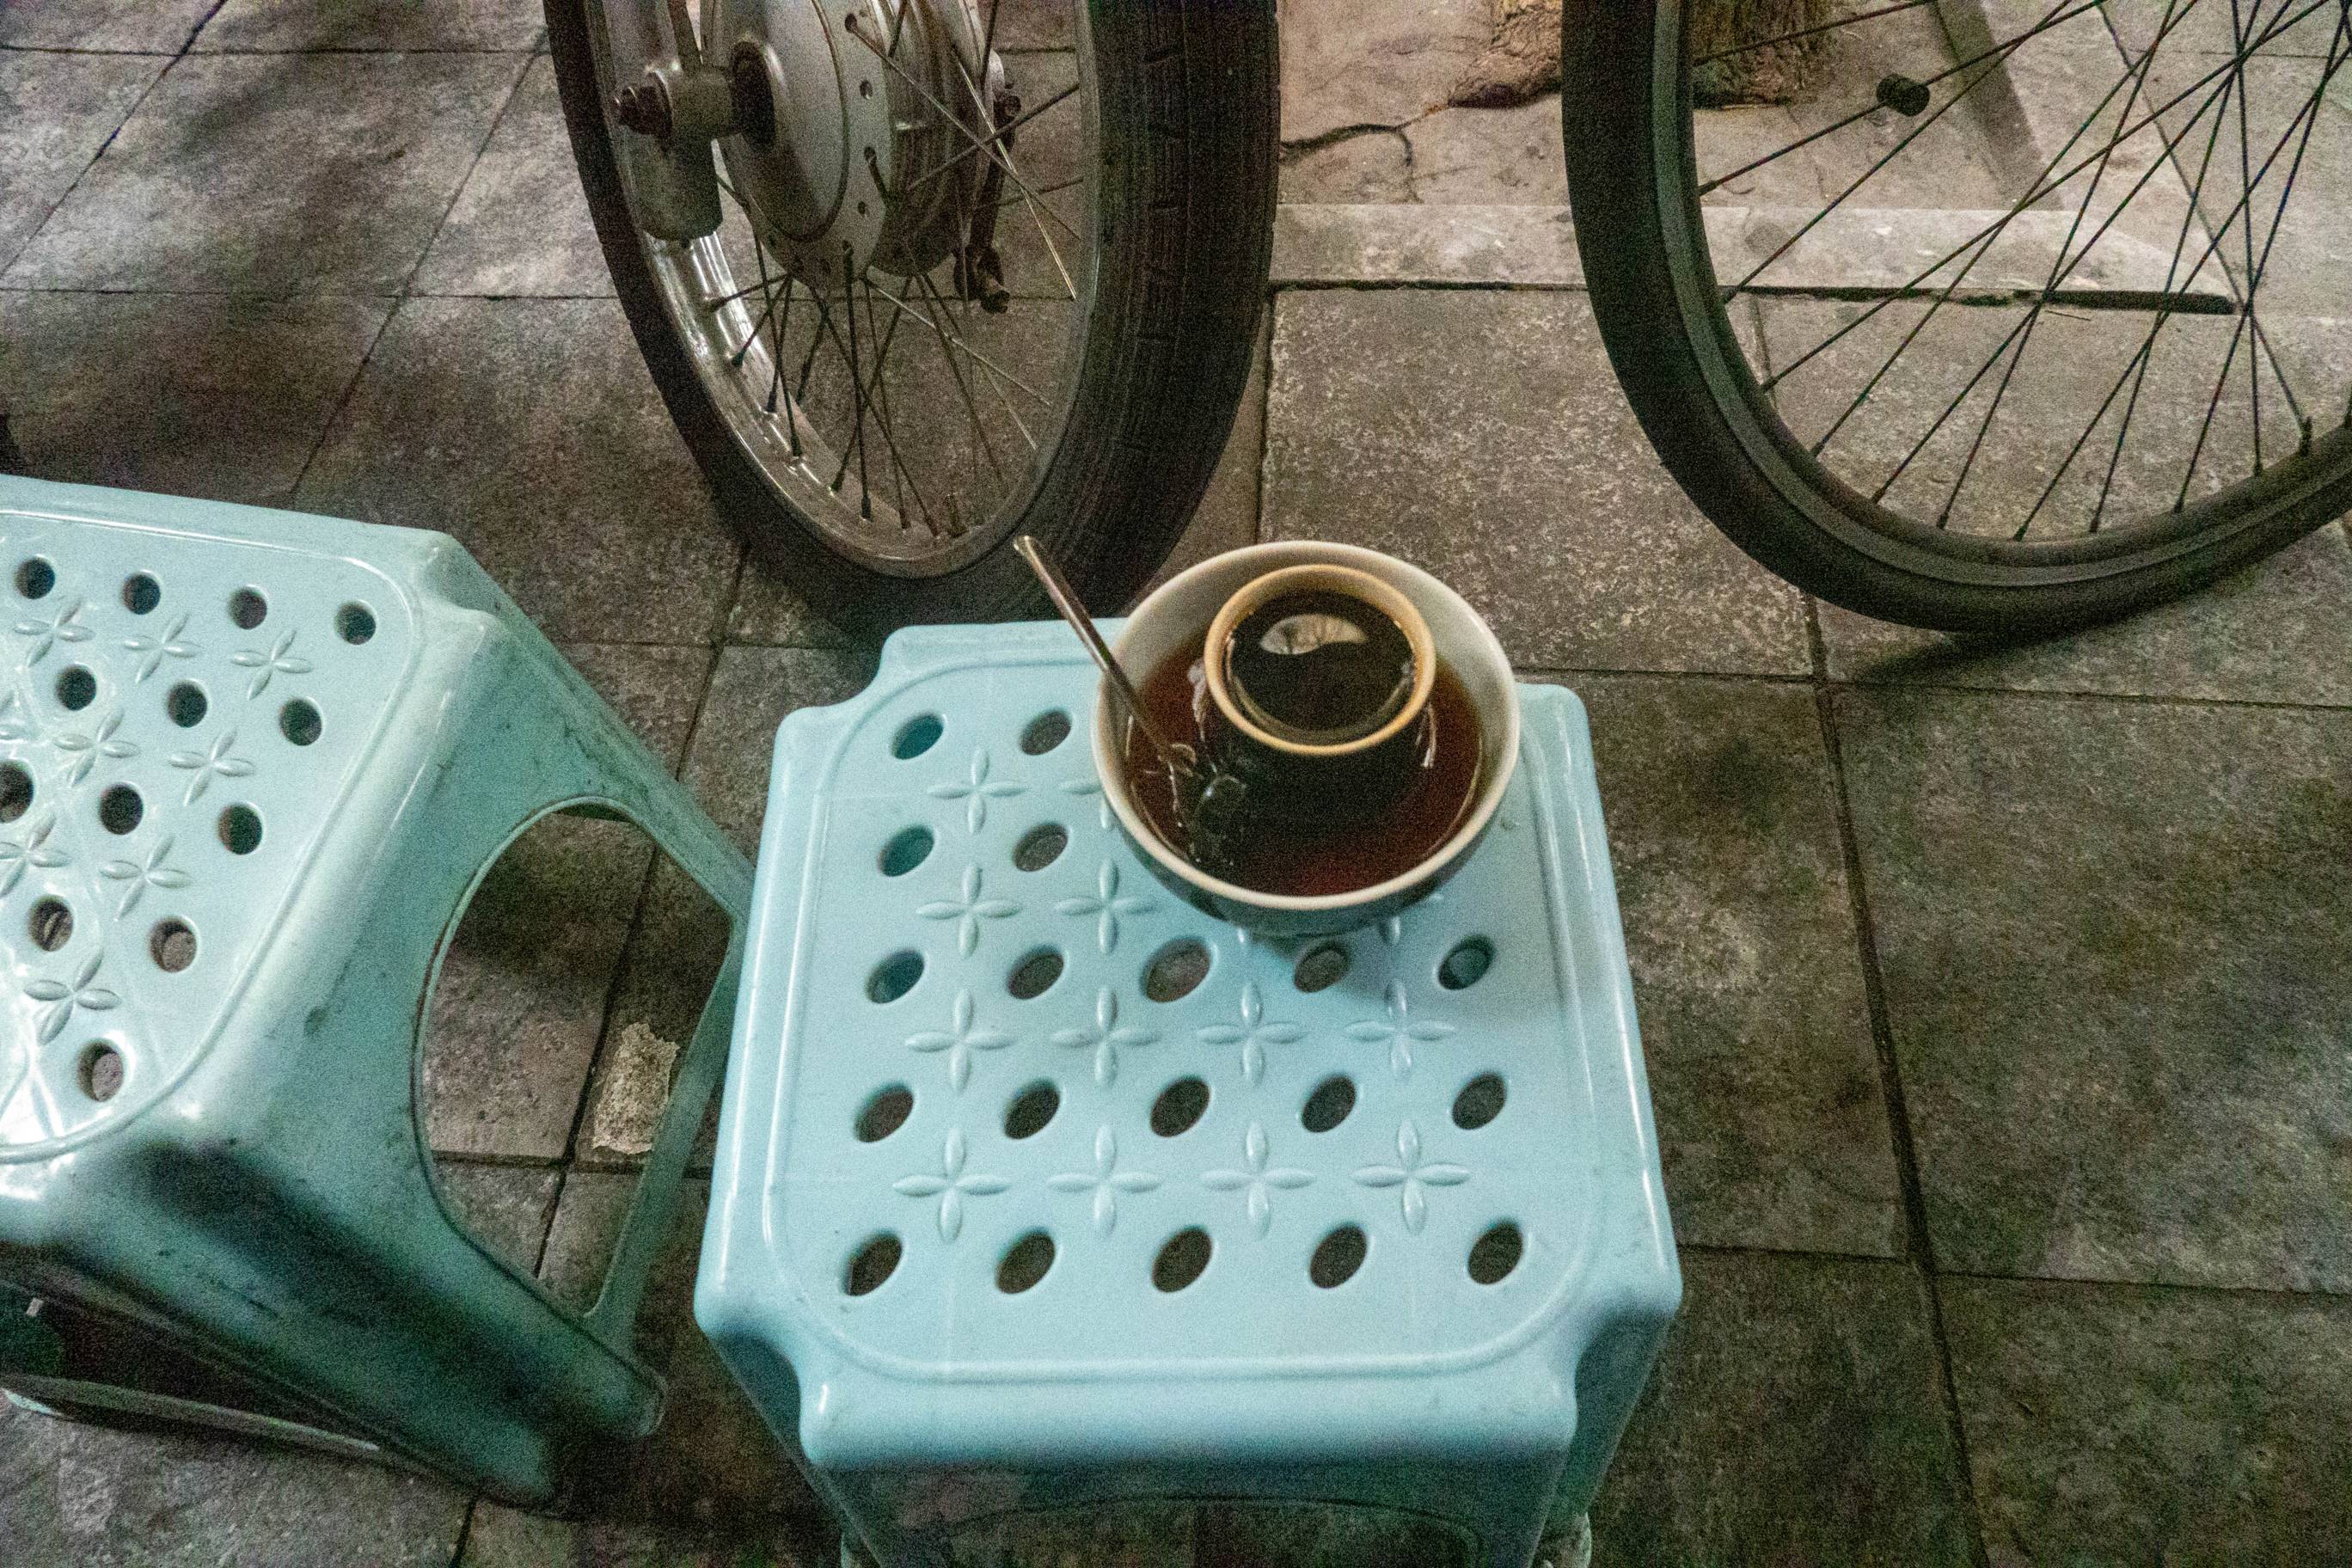  hot black coffee in a porcelain cup and then put that cup into a bowl of coffee and ice sitting on a small blue plastic table in front of two bike tires